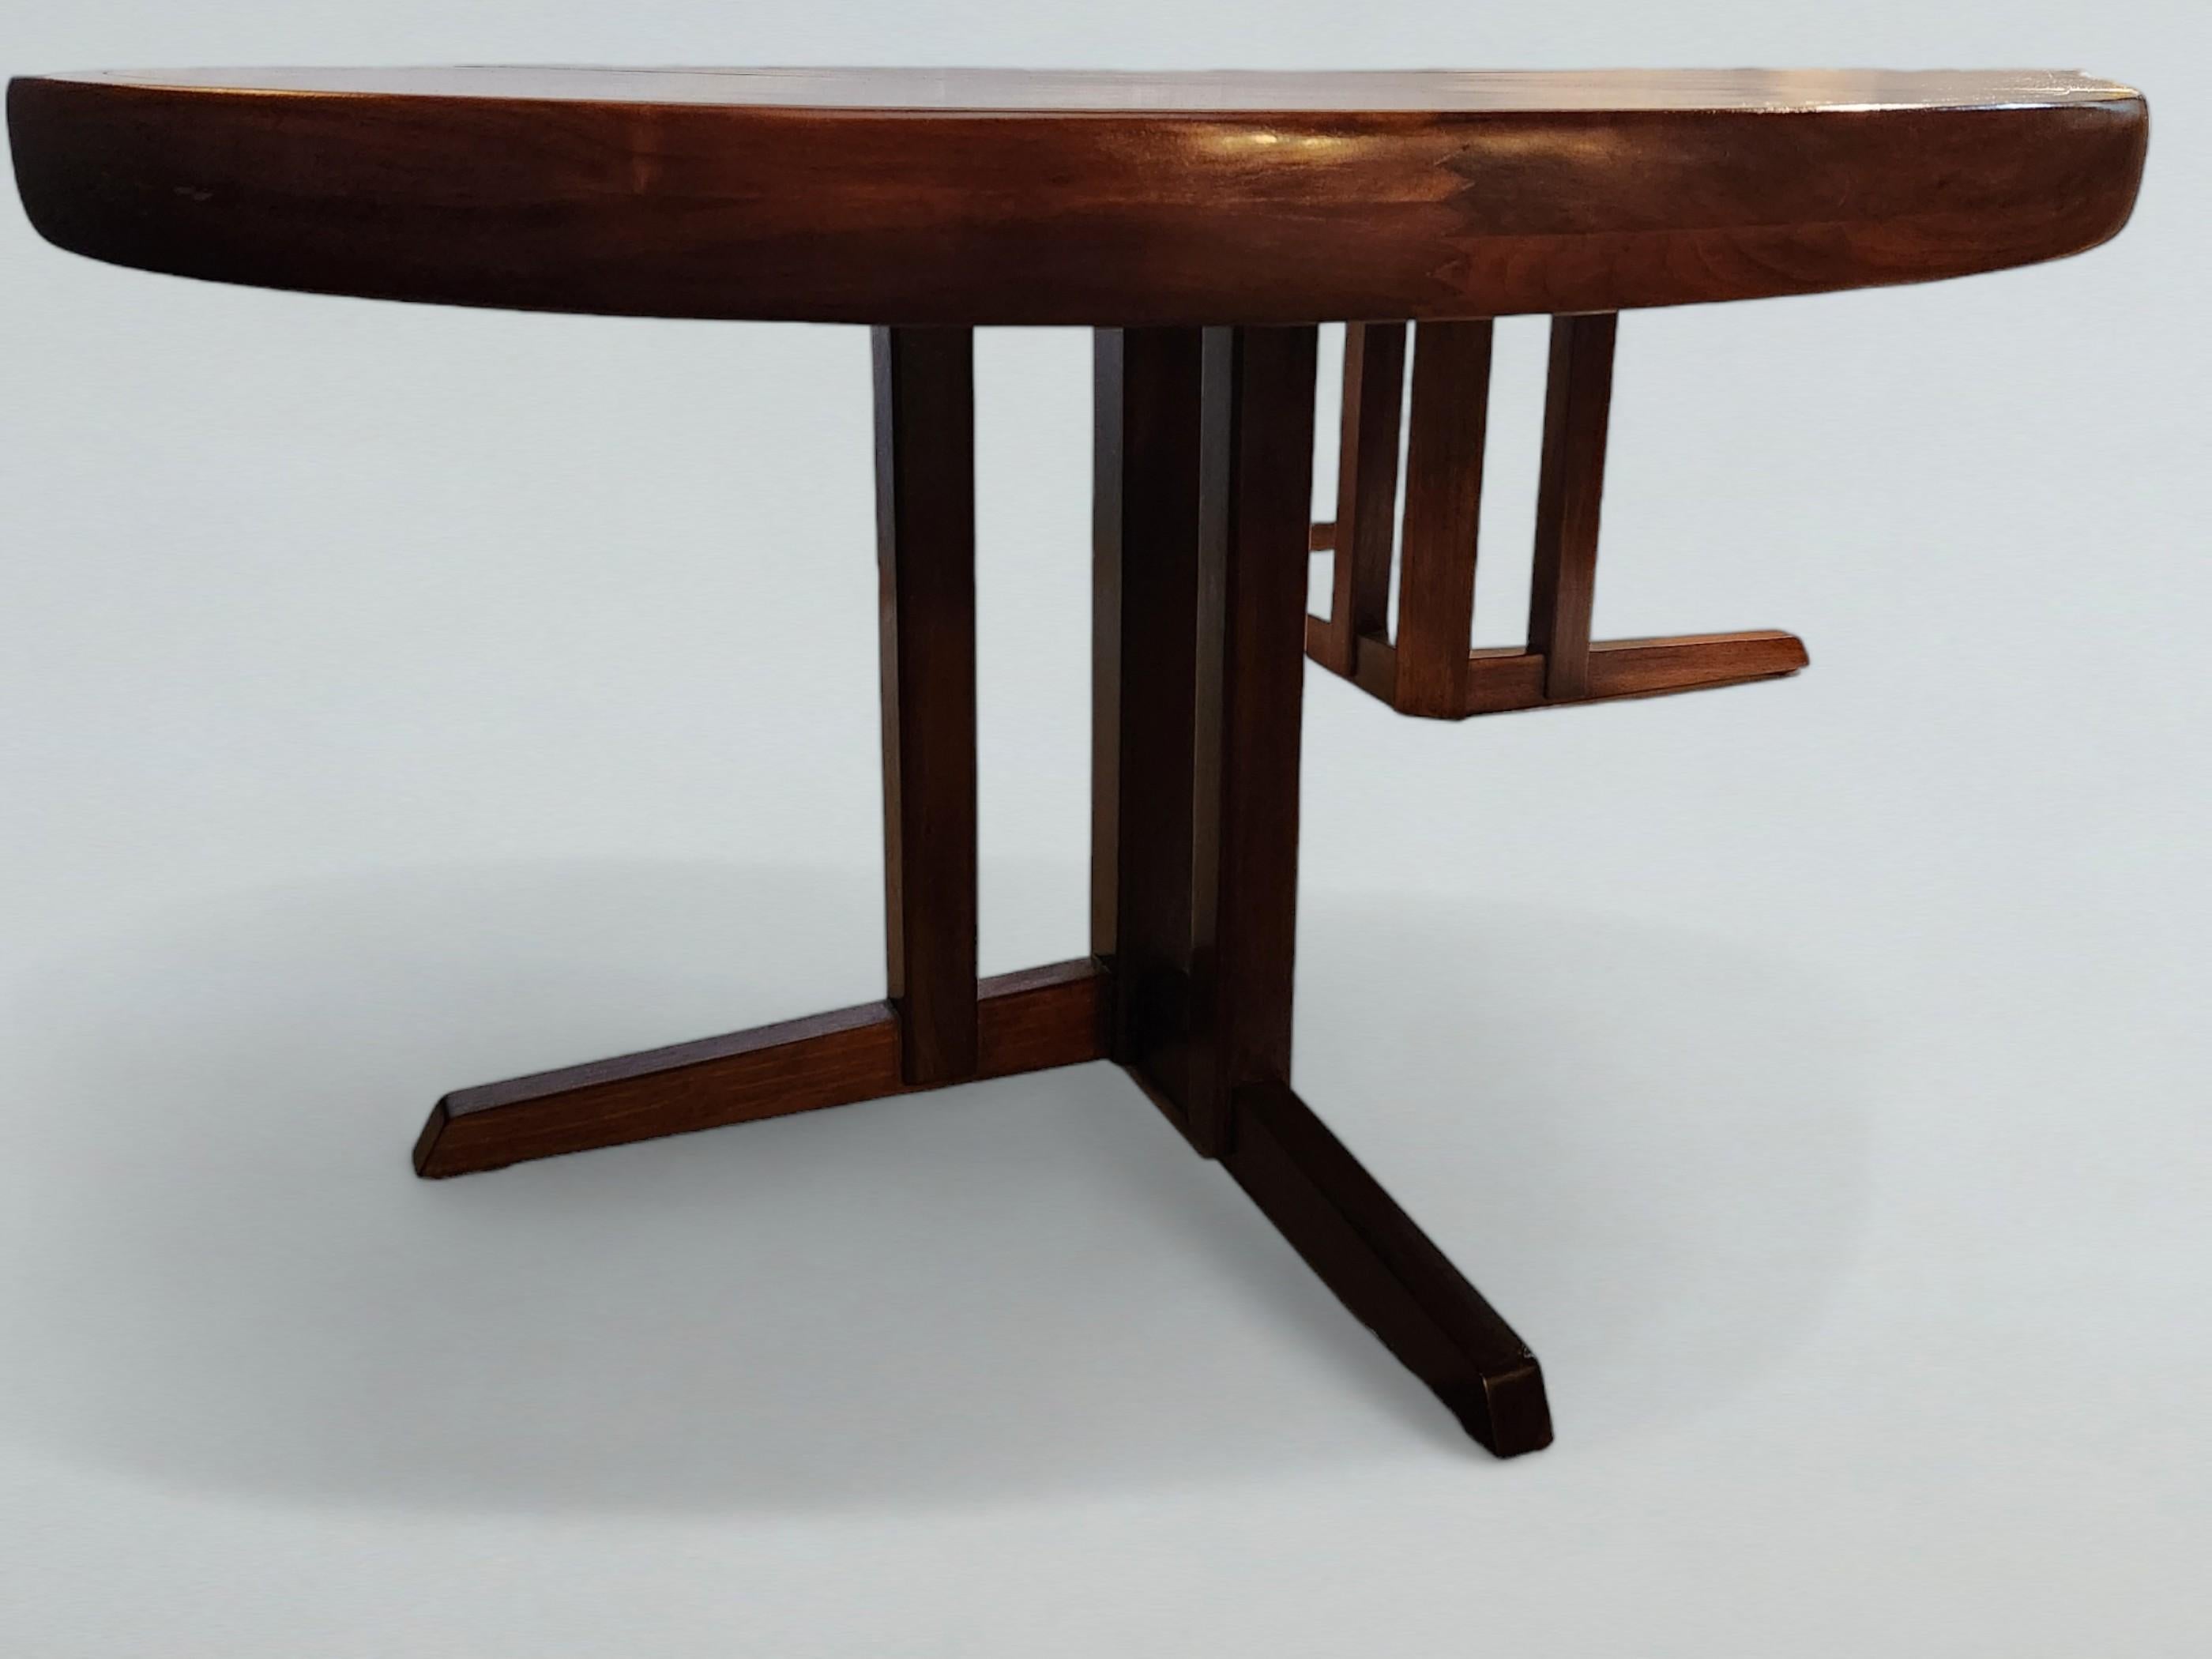 George Nakashima Extendable Walnut Dining Table Model 277 for Widdicomb, 1959 In Good Condition For Sale In Camden, ME